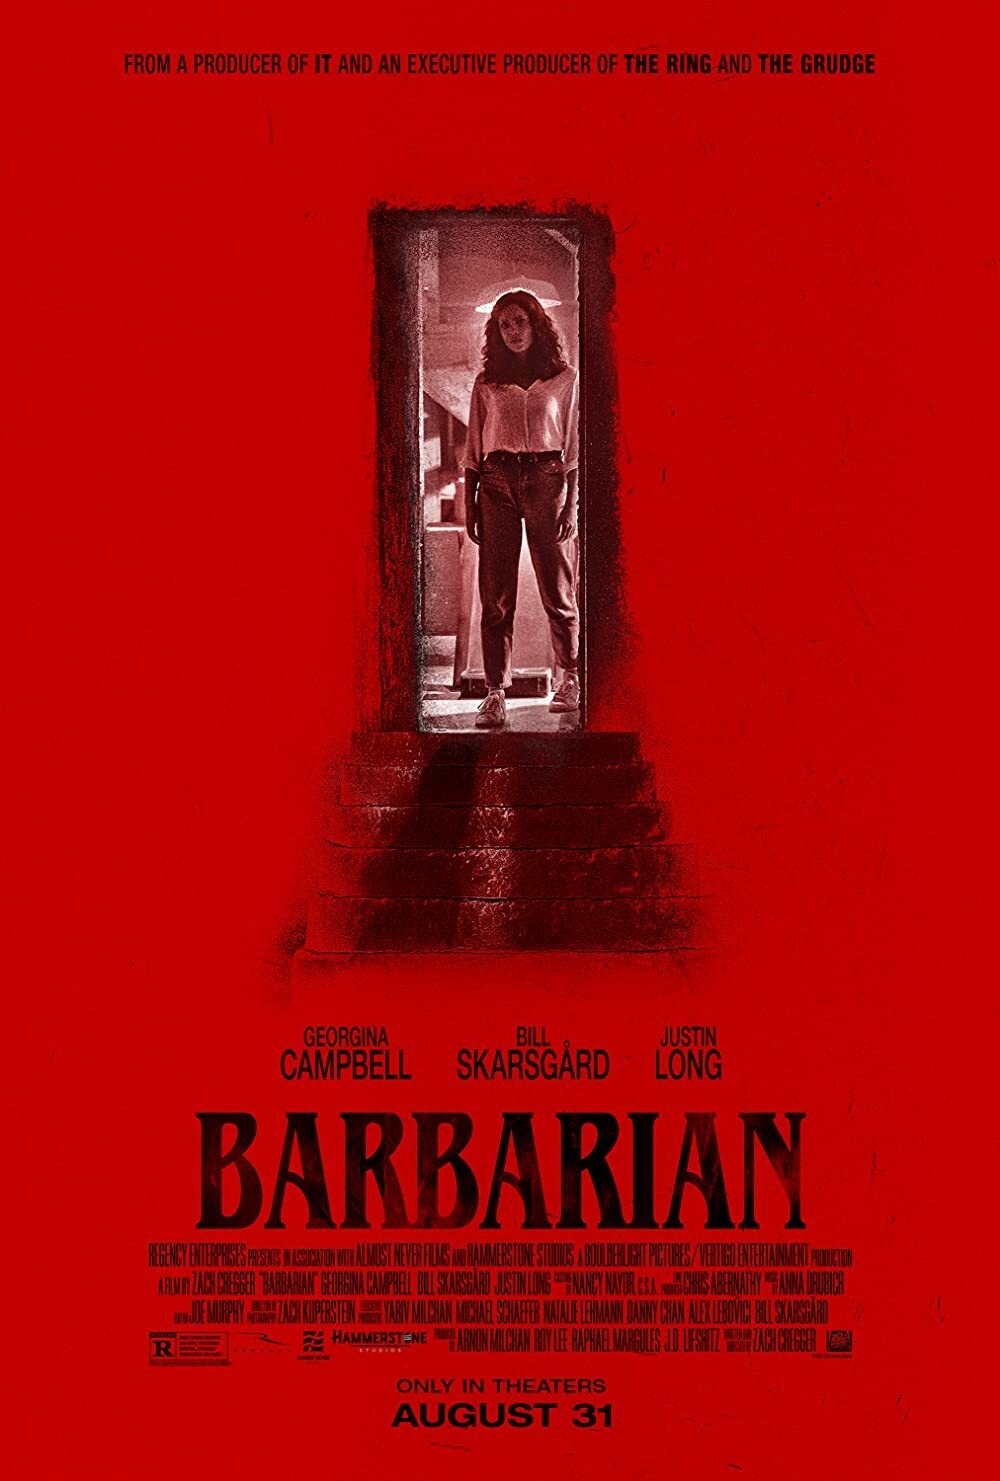 The movie poster for Barbarian. The poster is primarily red, with Georgina Campbell&#x27;s character Tess standing in a doorway to a basement with stairs leading down that fade out.